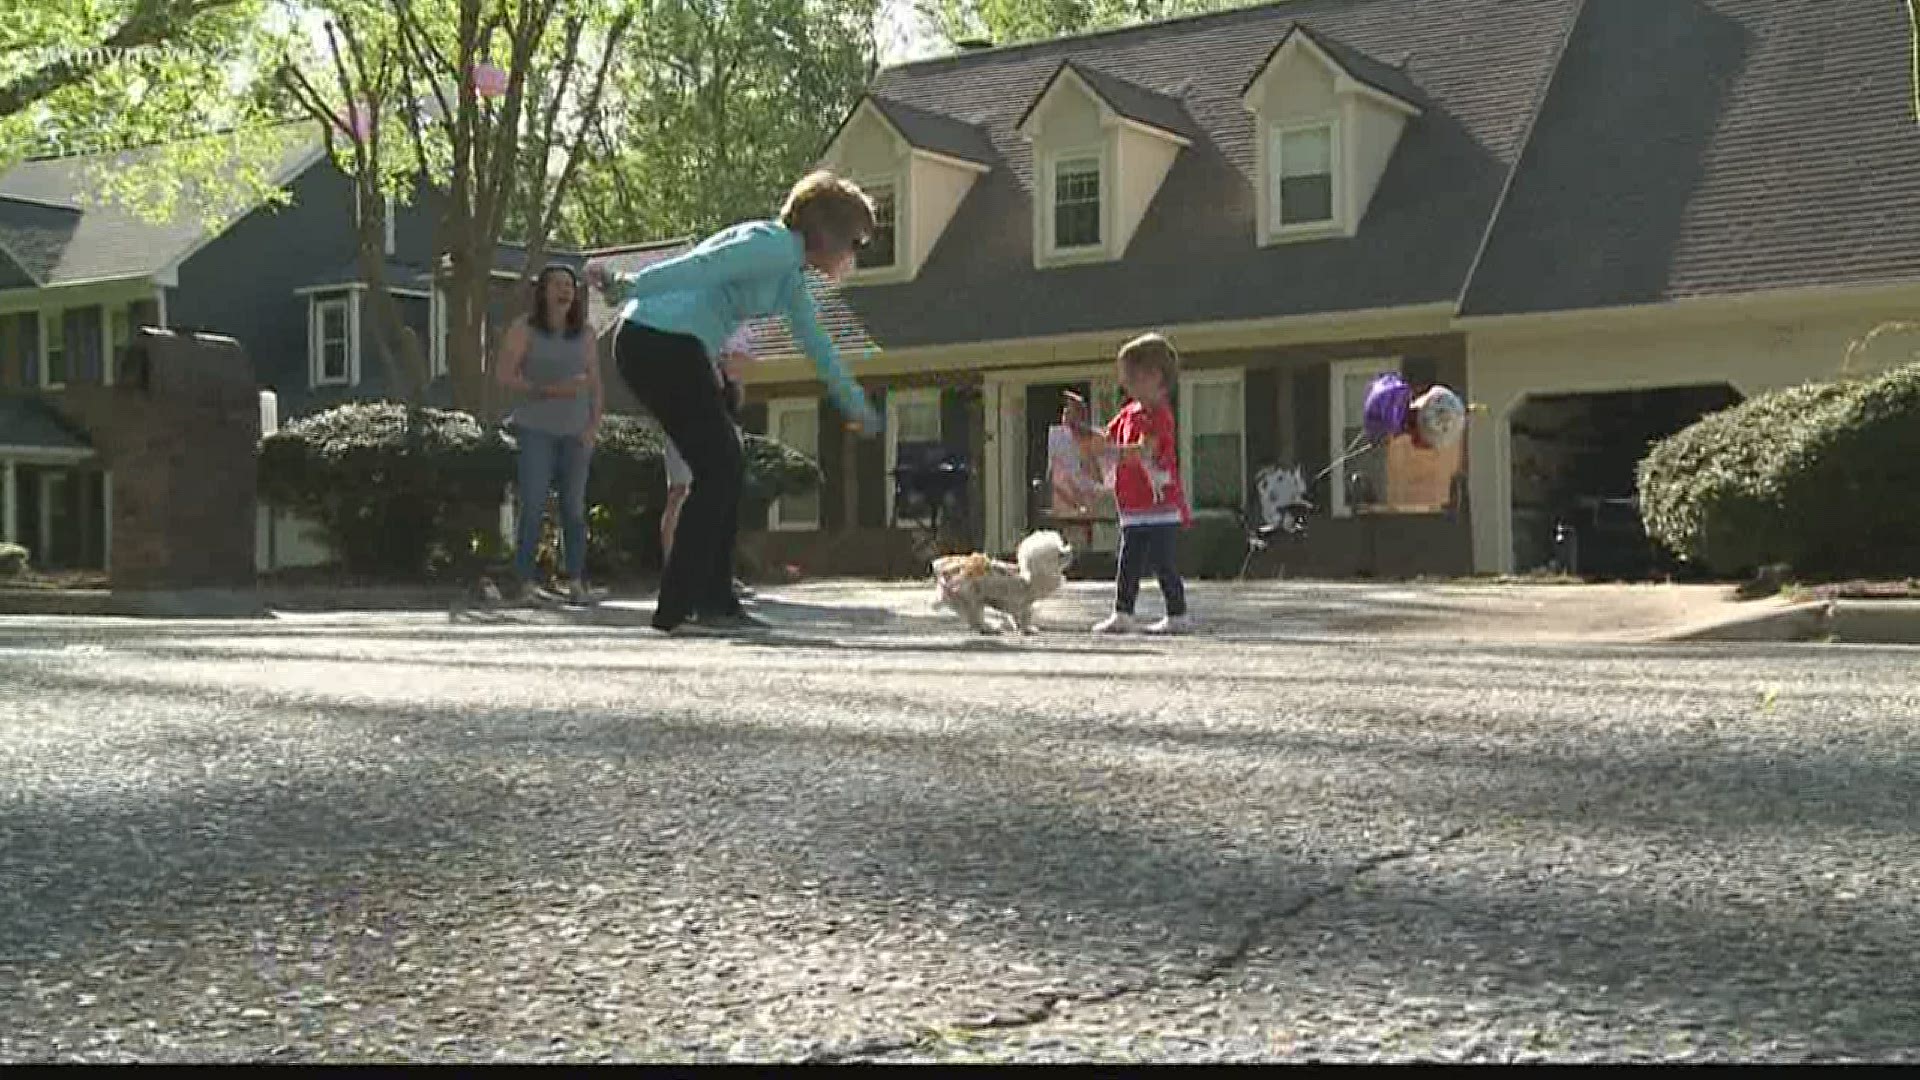 Little Elizabeth loves watching folks walk their dogs. For her birthday, her parents decided to bring dozens of dogs to the front yard.